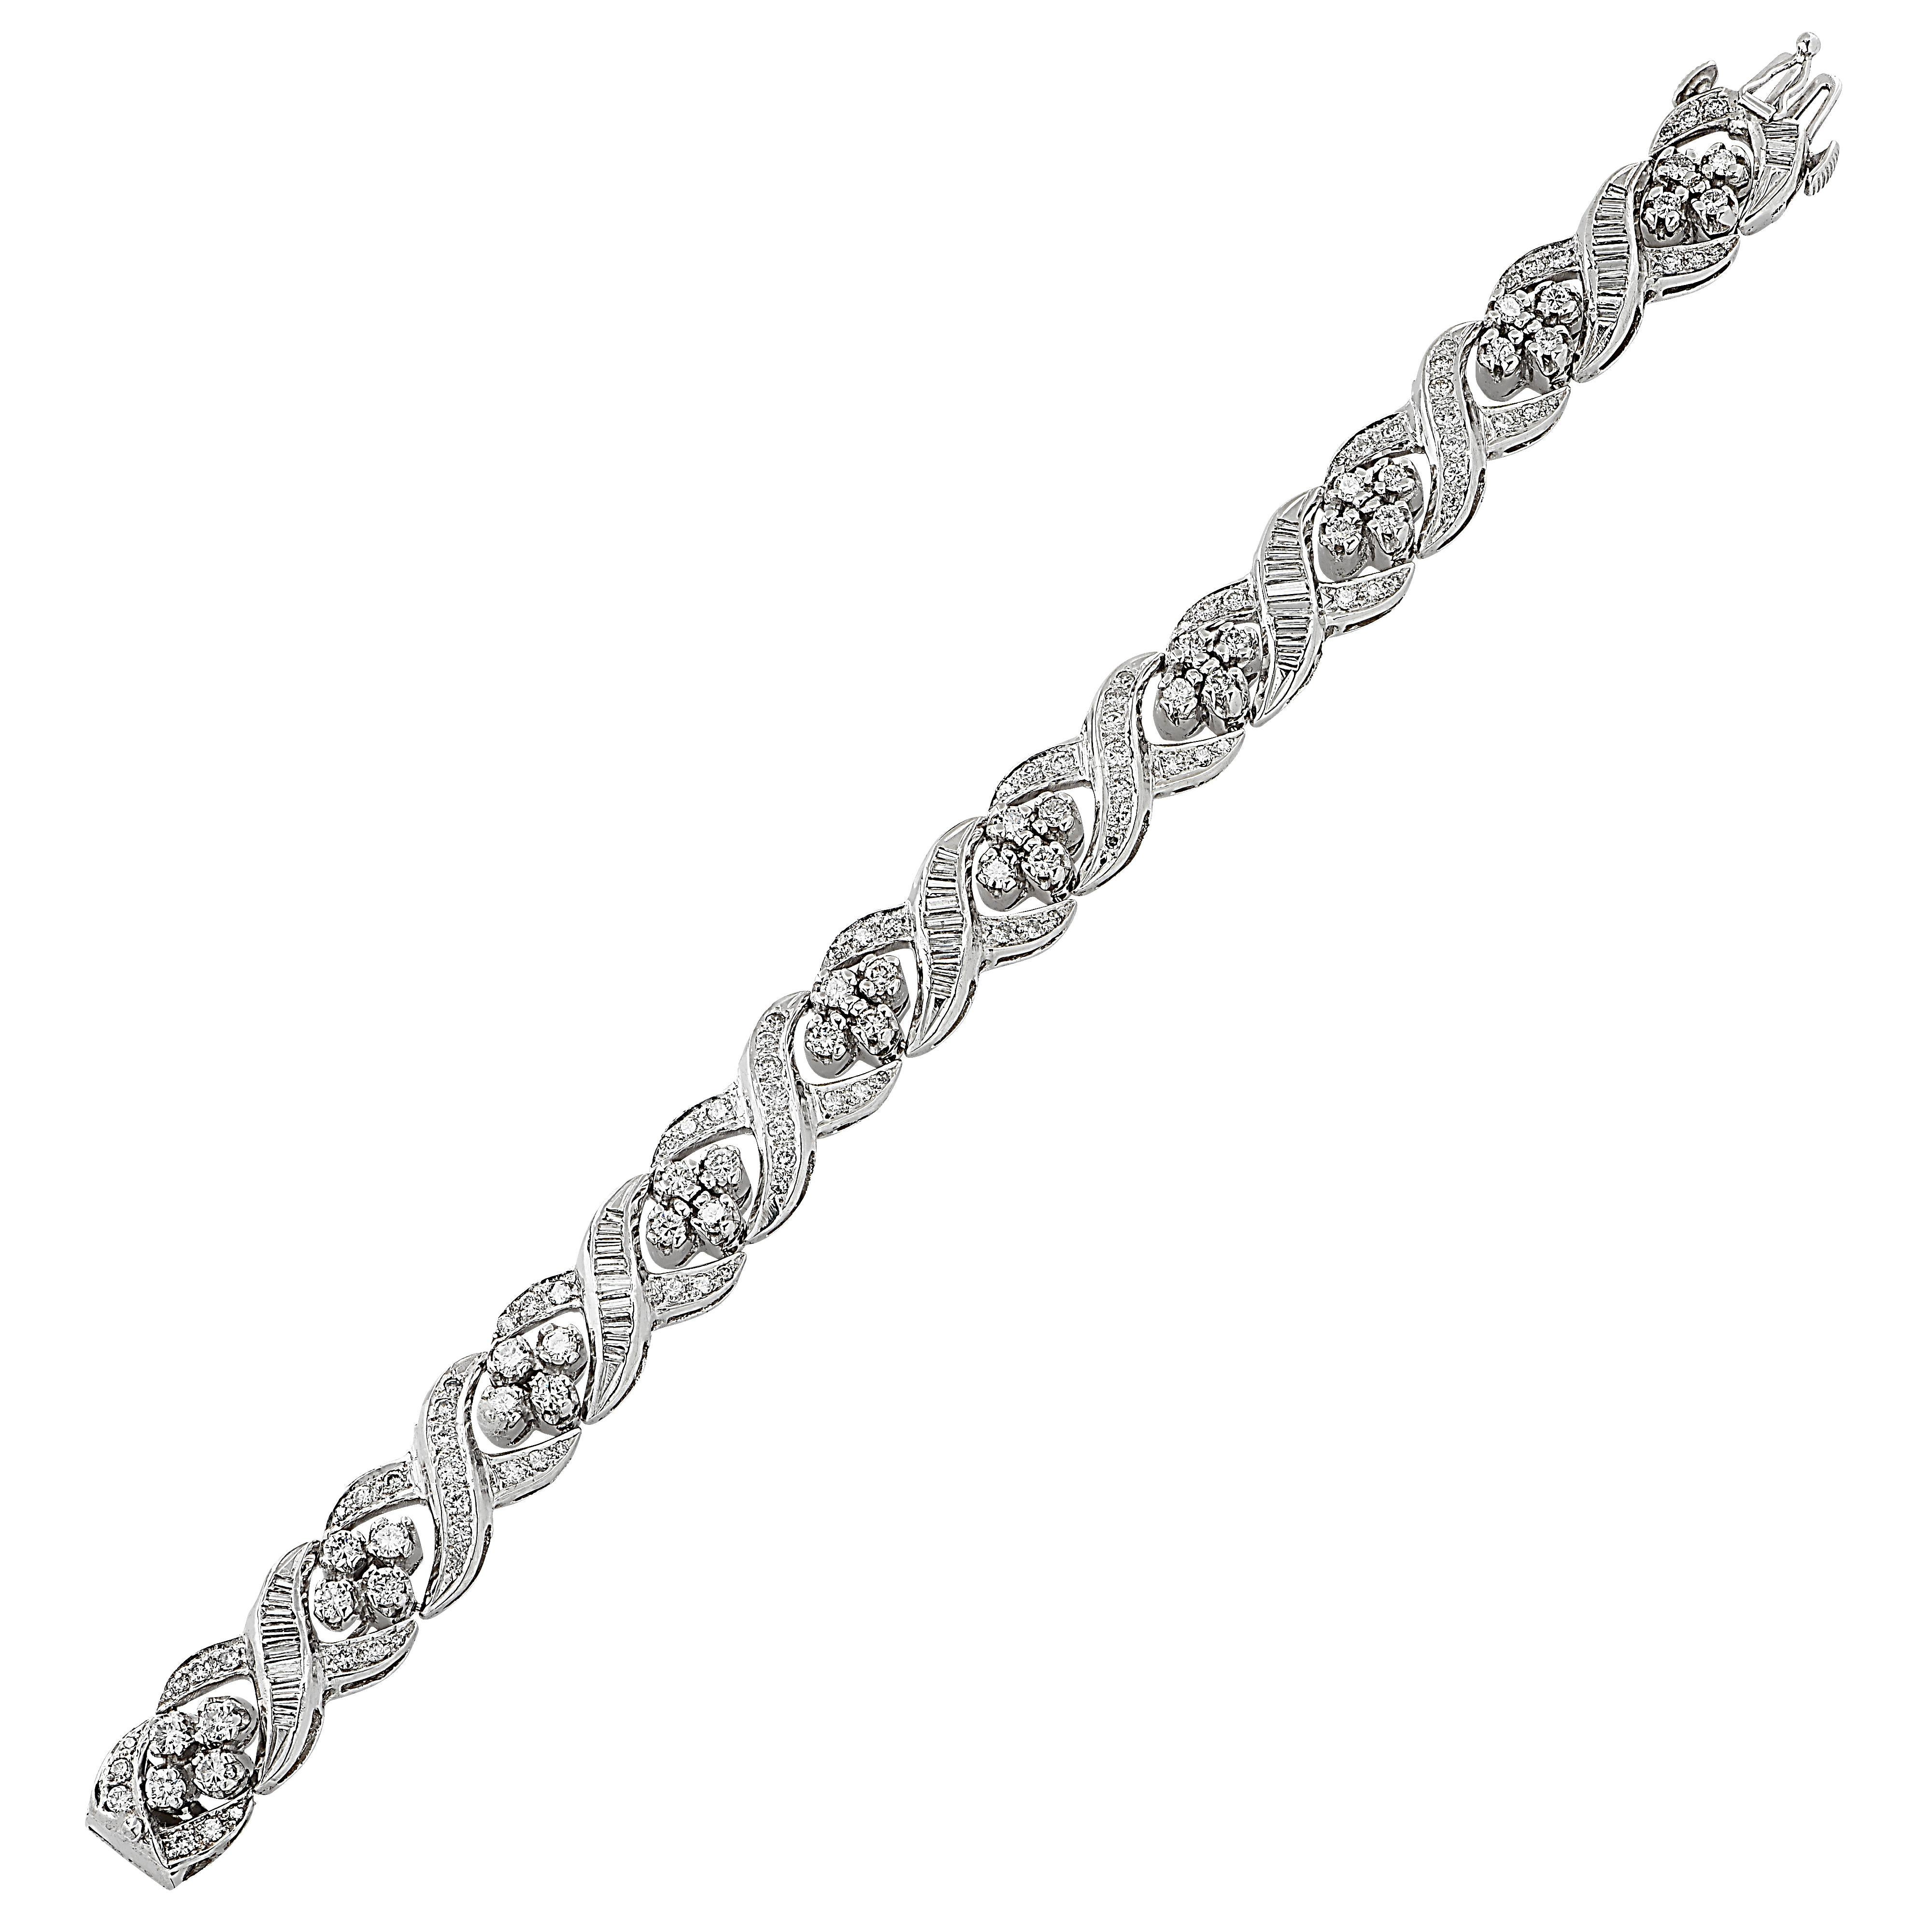 Stunning diamond bracelet circa 1960 crafted in platinum, showcasing 193 mixed cut diamonds weighing approximately 5 carats total, I-J color, VS-SI clarity. Typical of the 1960s, this spectacular bracelet features round cut and baguette cut